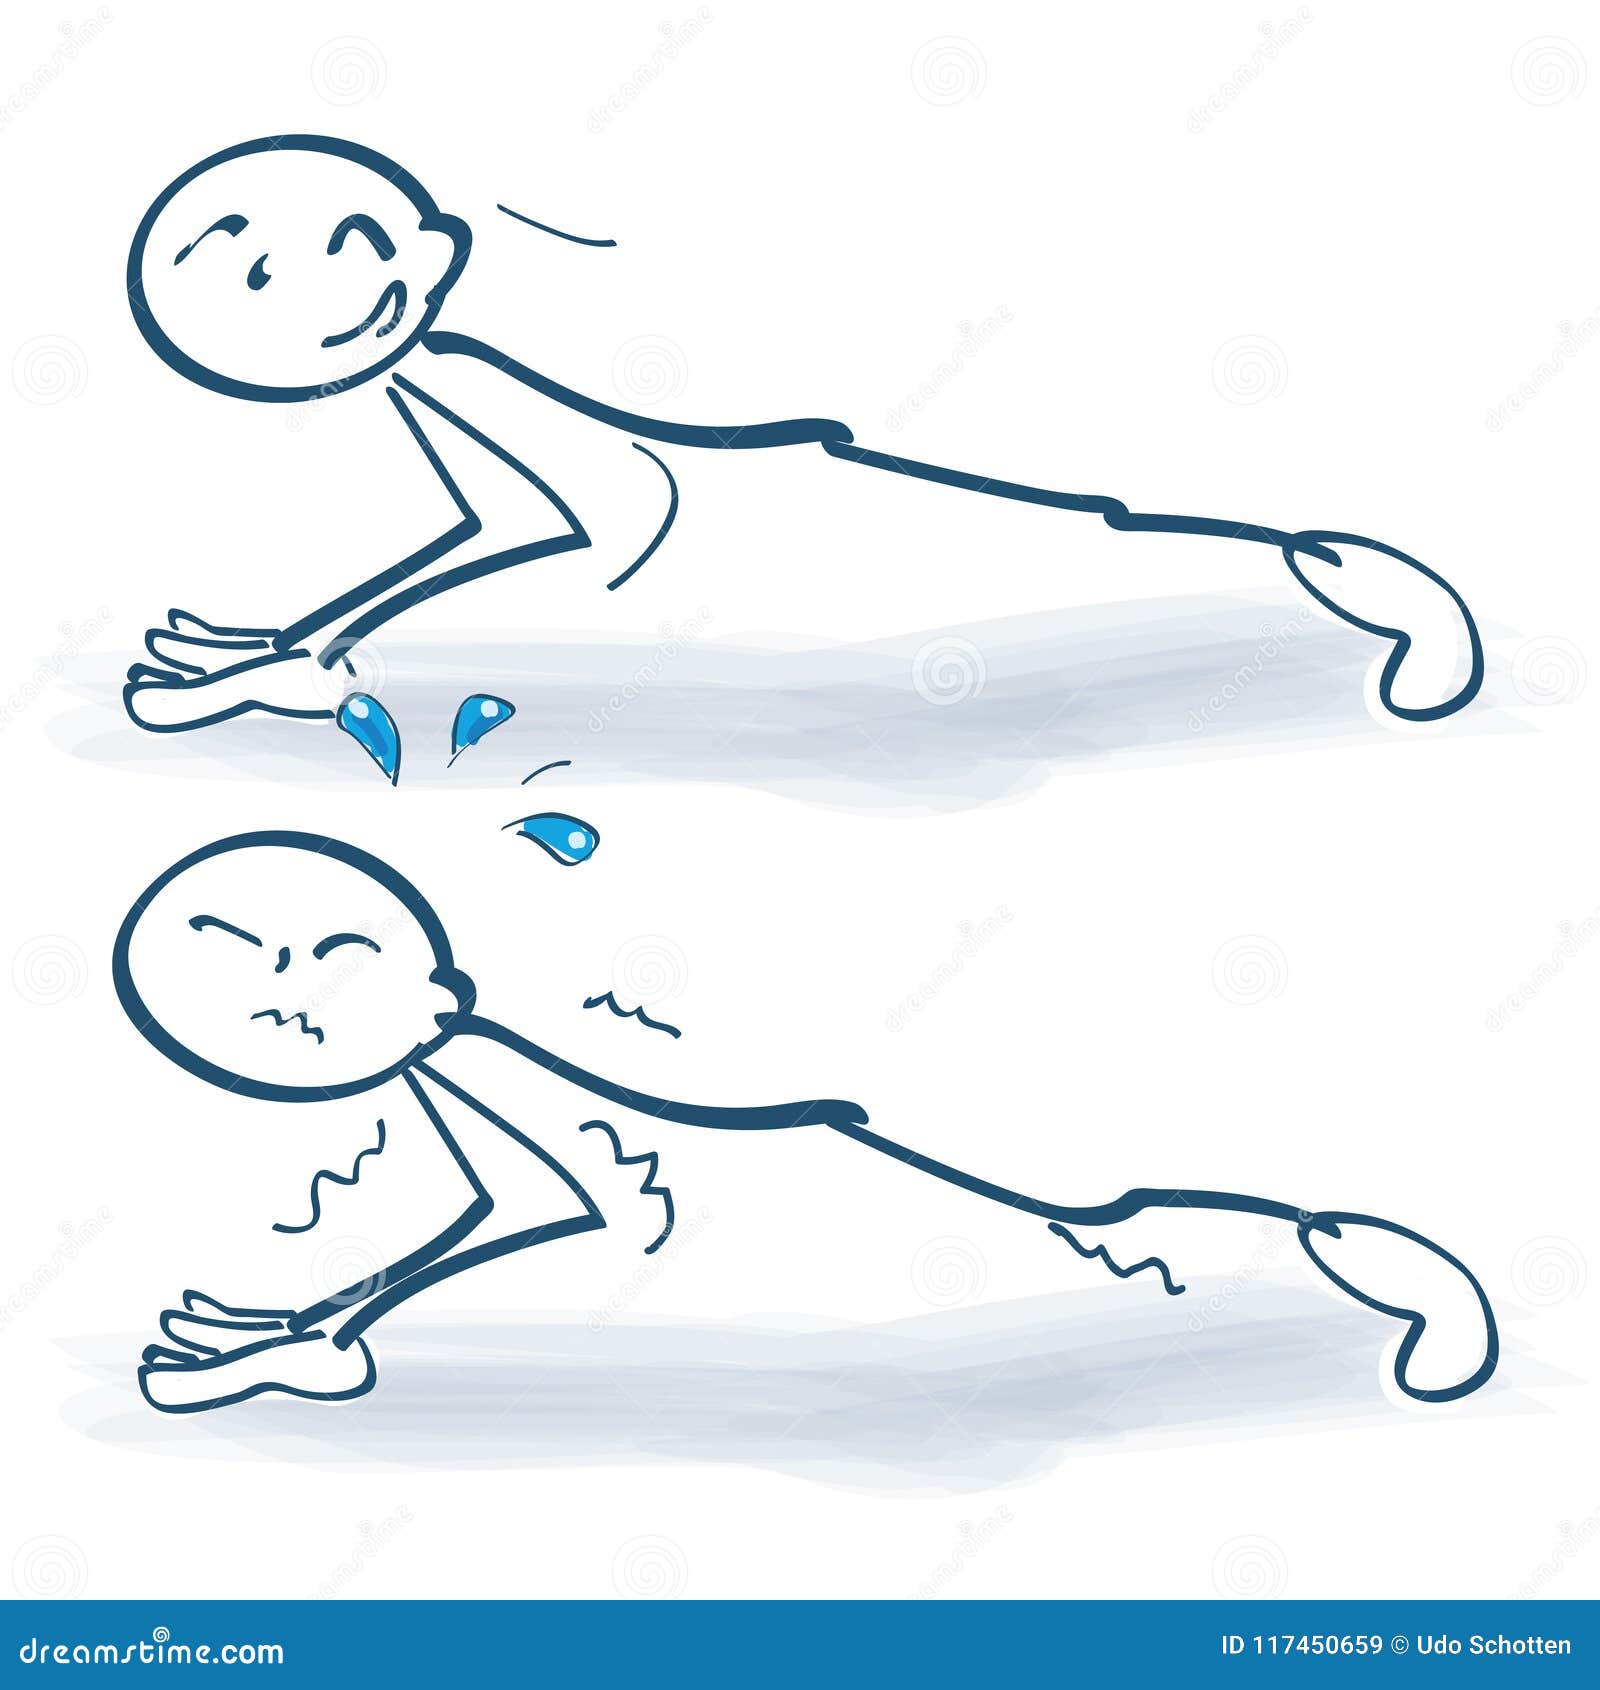 stick figures are doing pushups